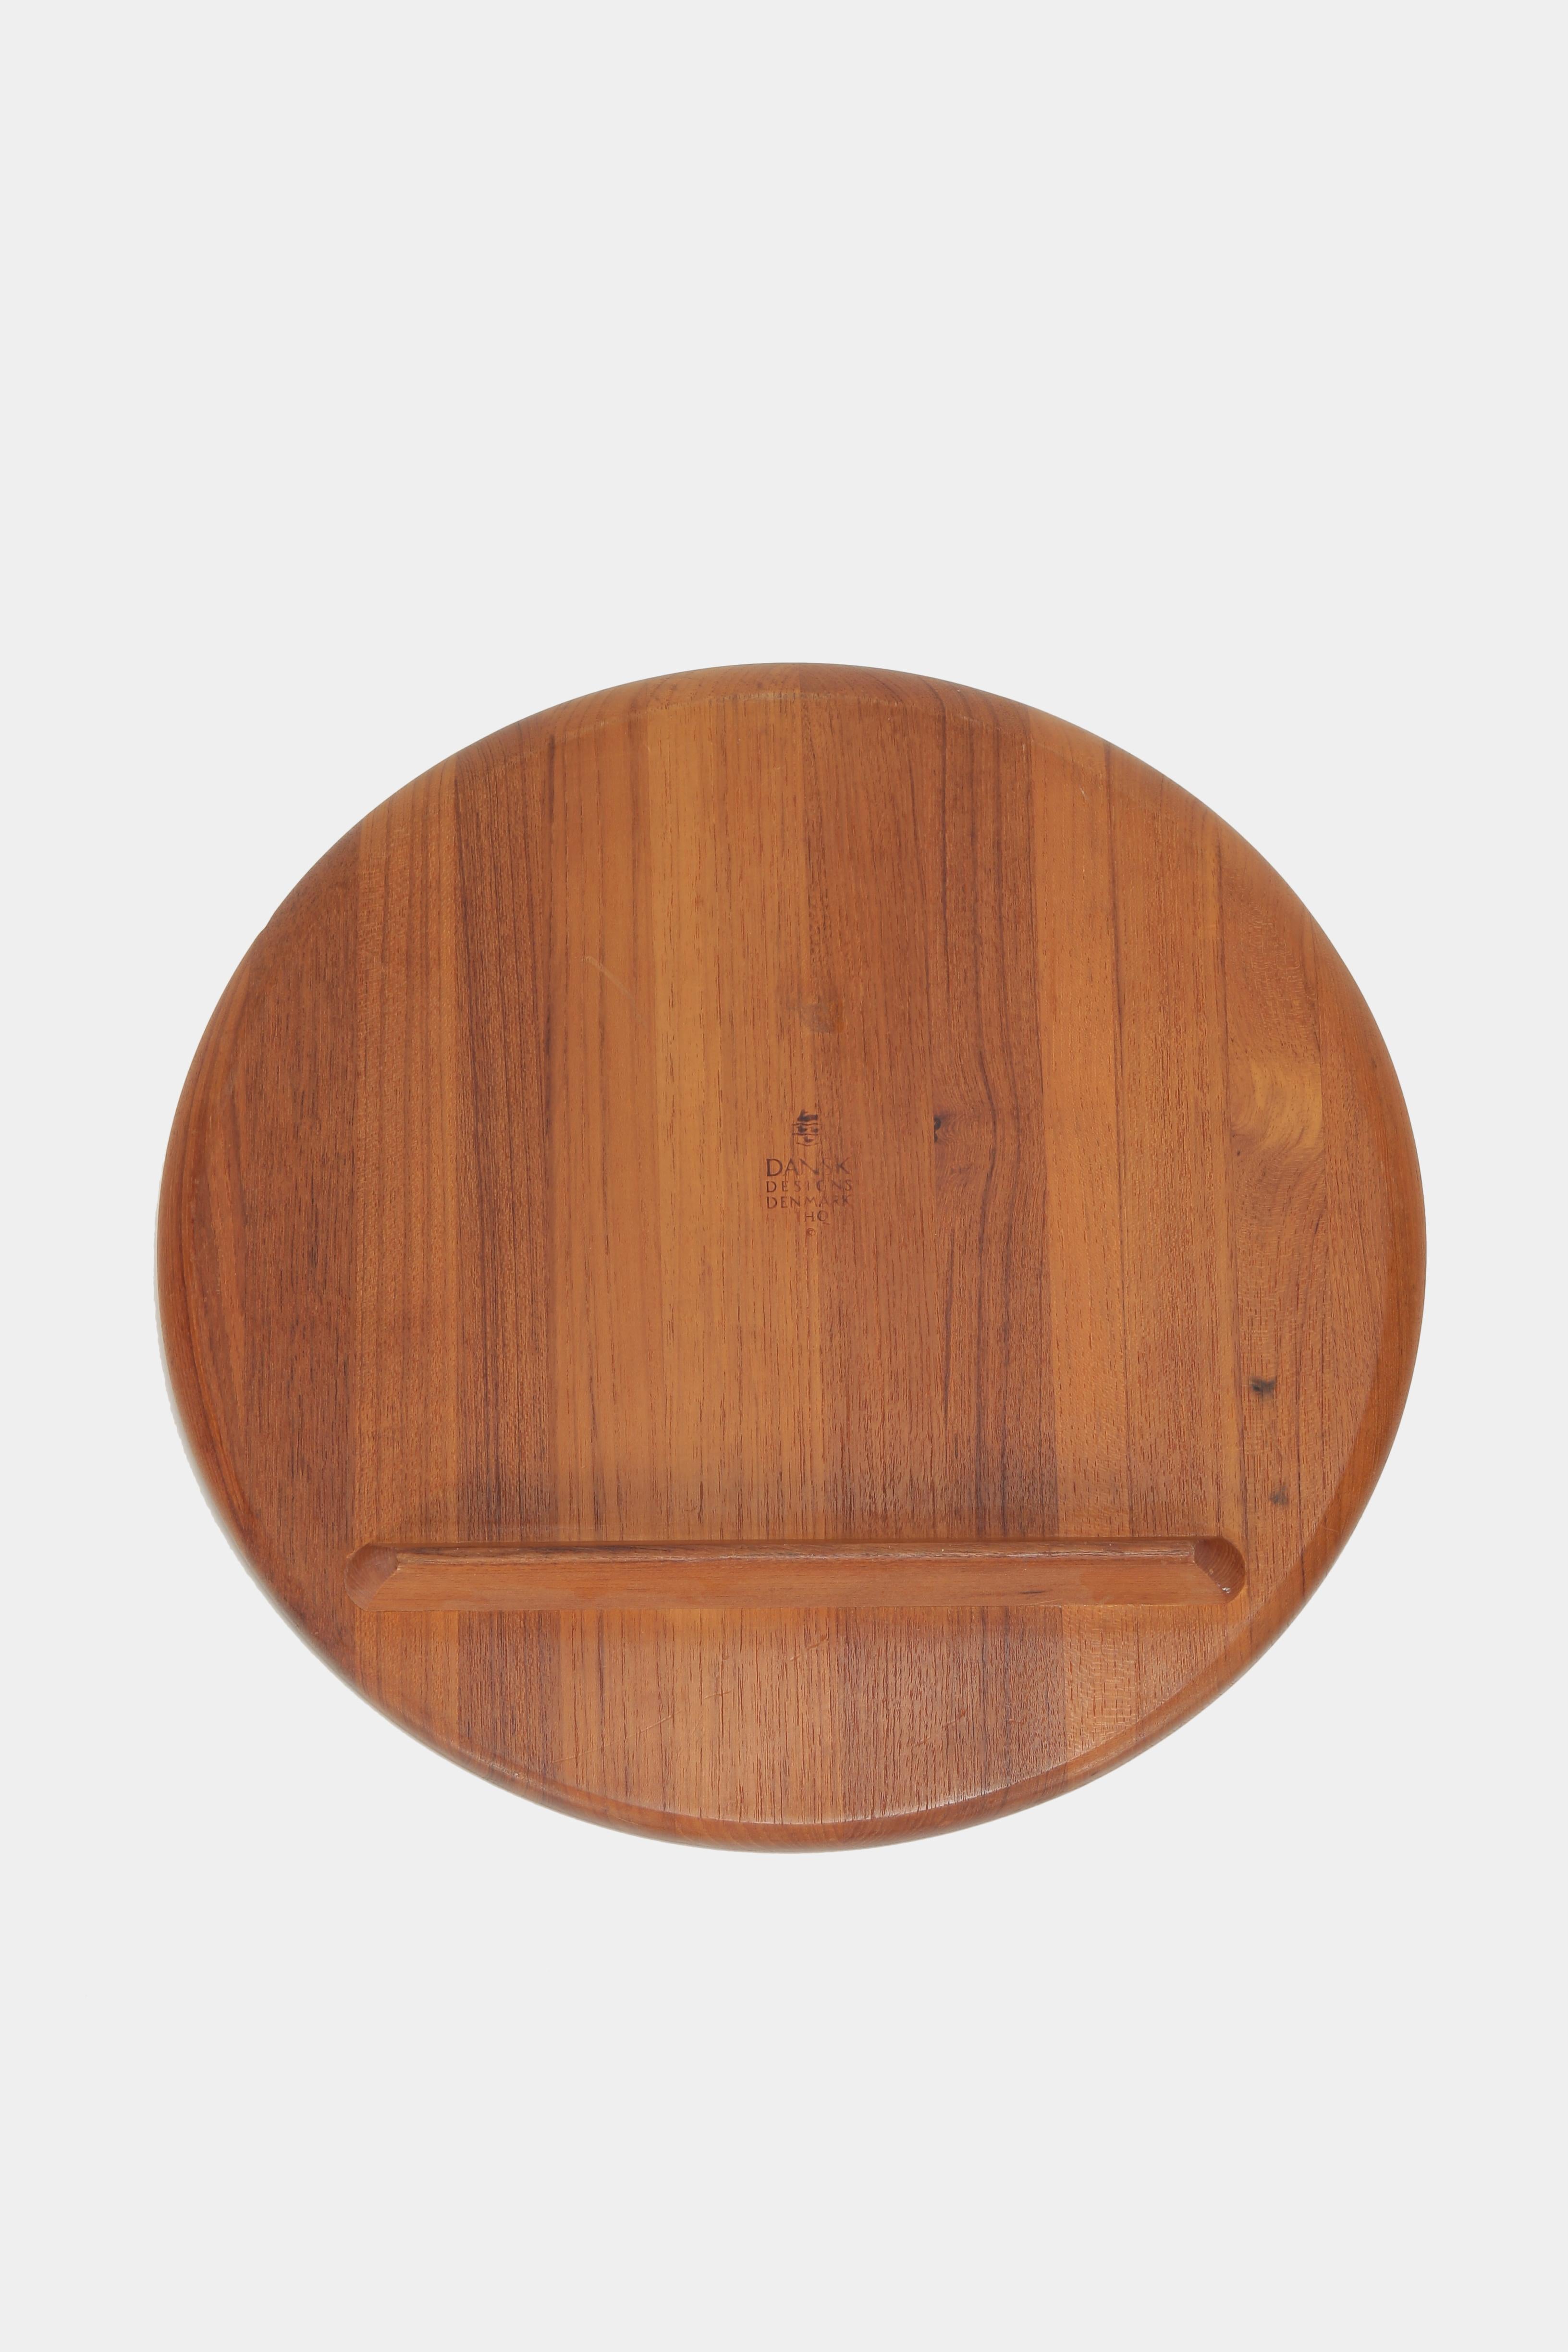 Jens Quistgaard Cutting Board Dansk Design 1950s In Good Condition For Sale In Basel, CH